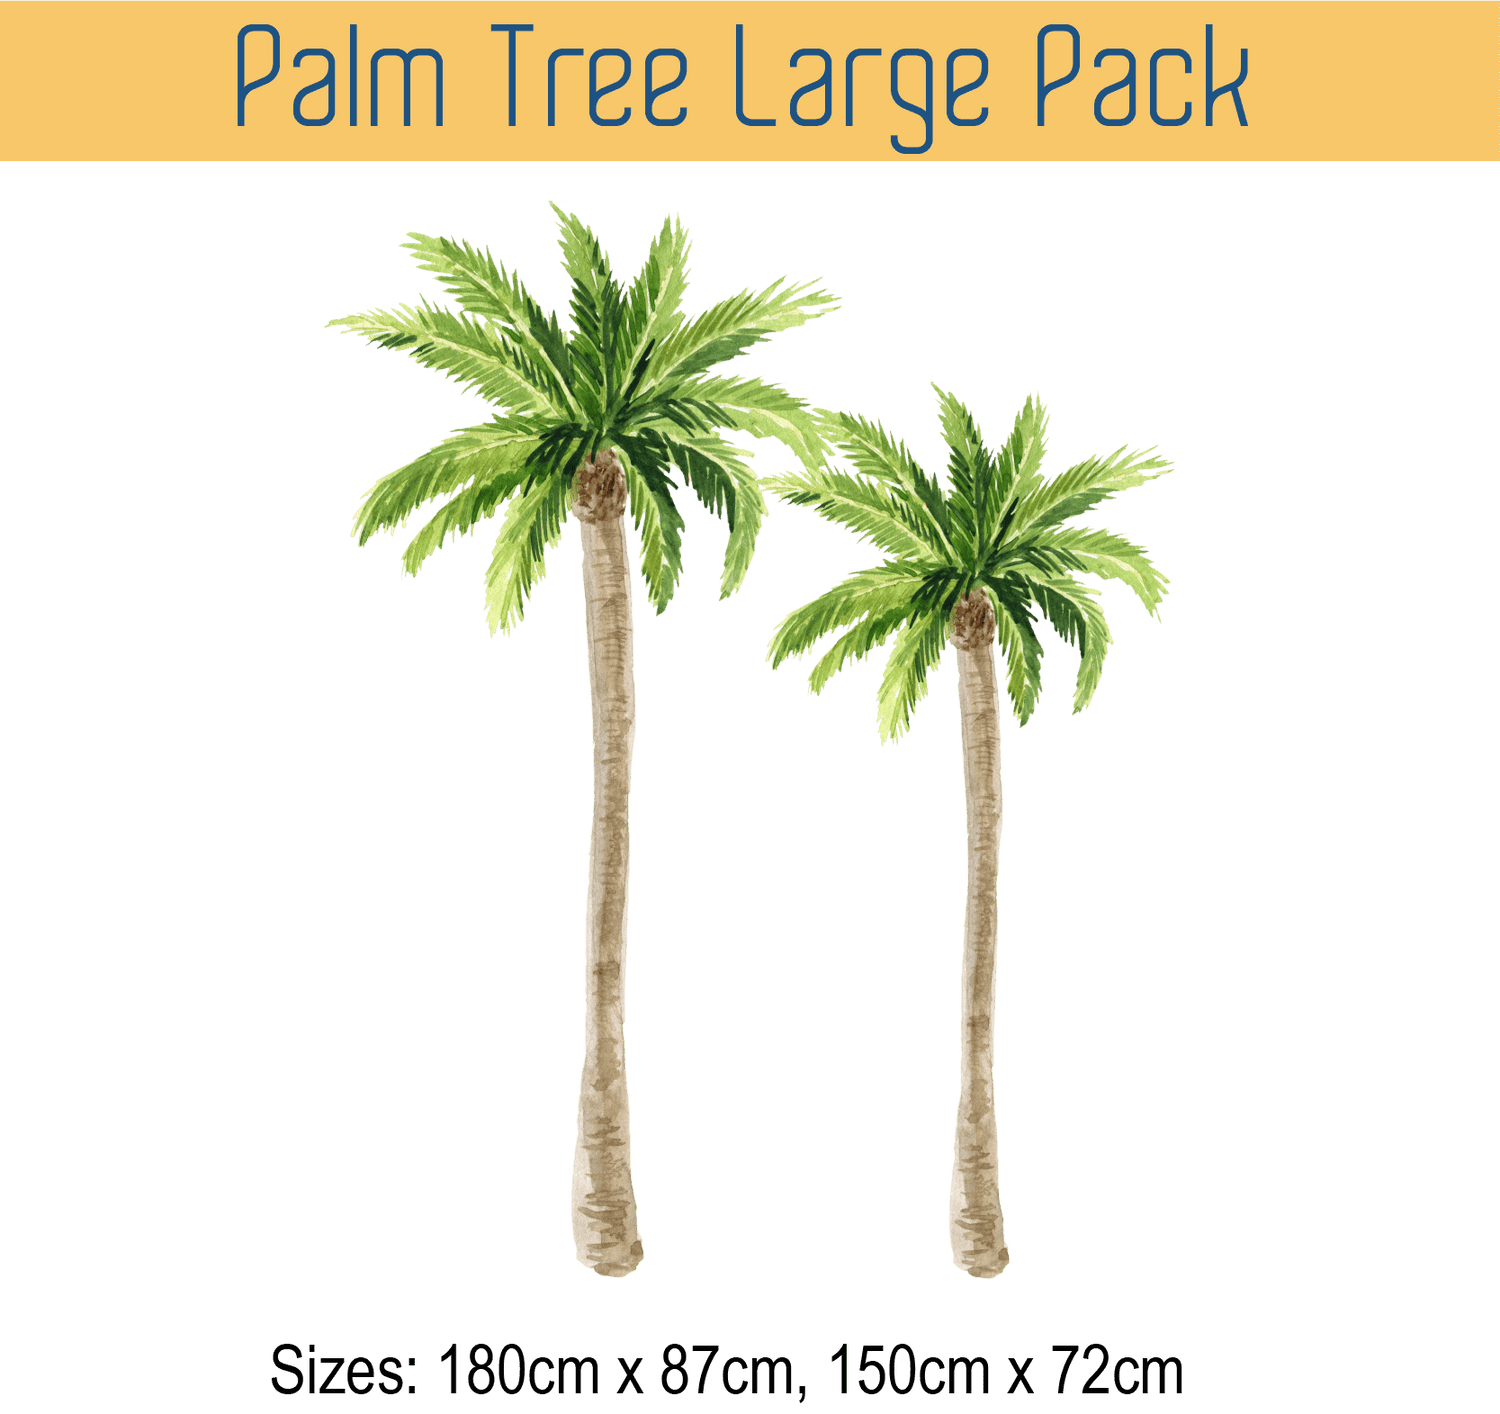 Two Palm Tree Large Wall Sticker Decals with removable fabric.